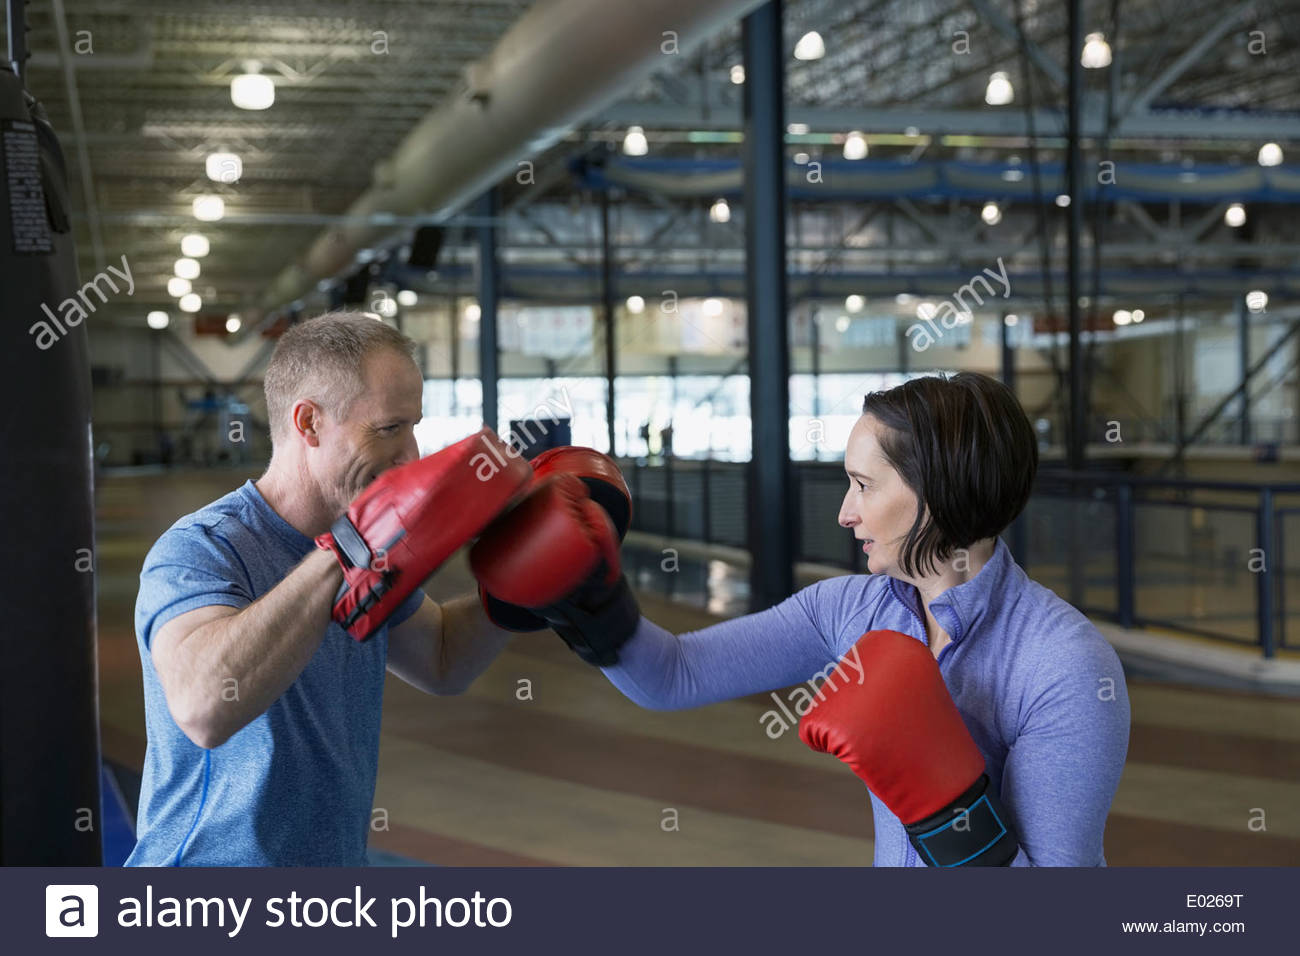 Woman boxing with personal trainer Stock Photo